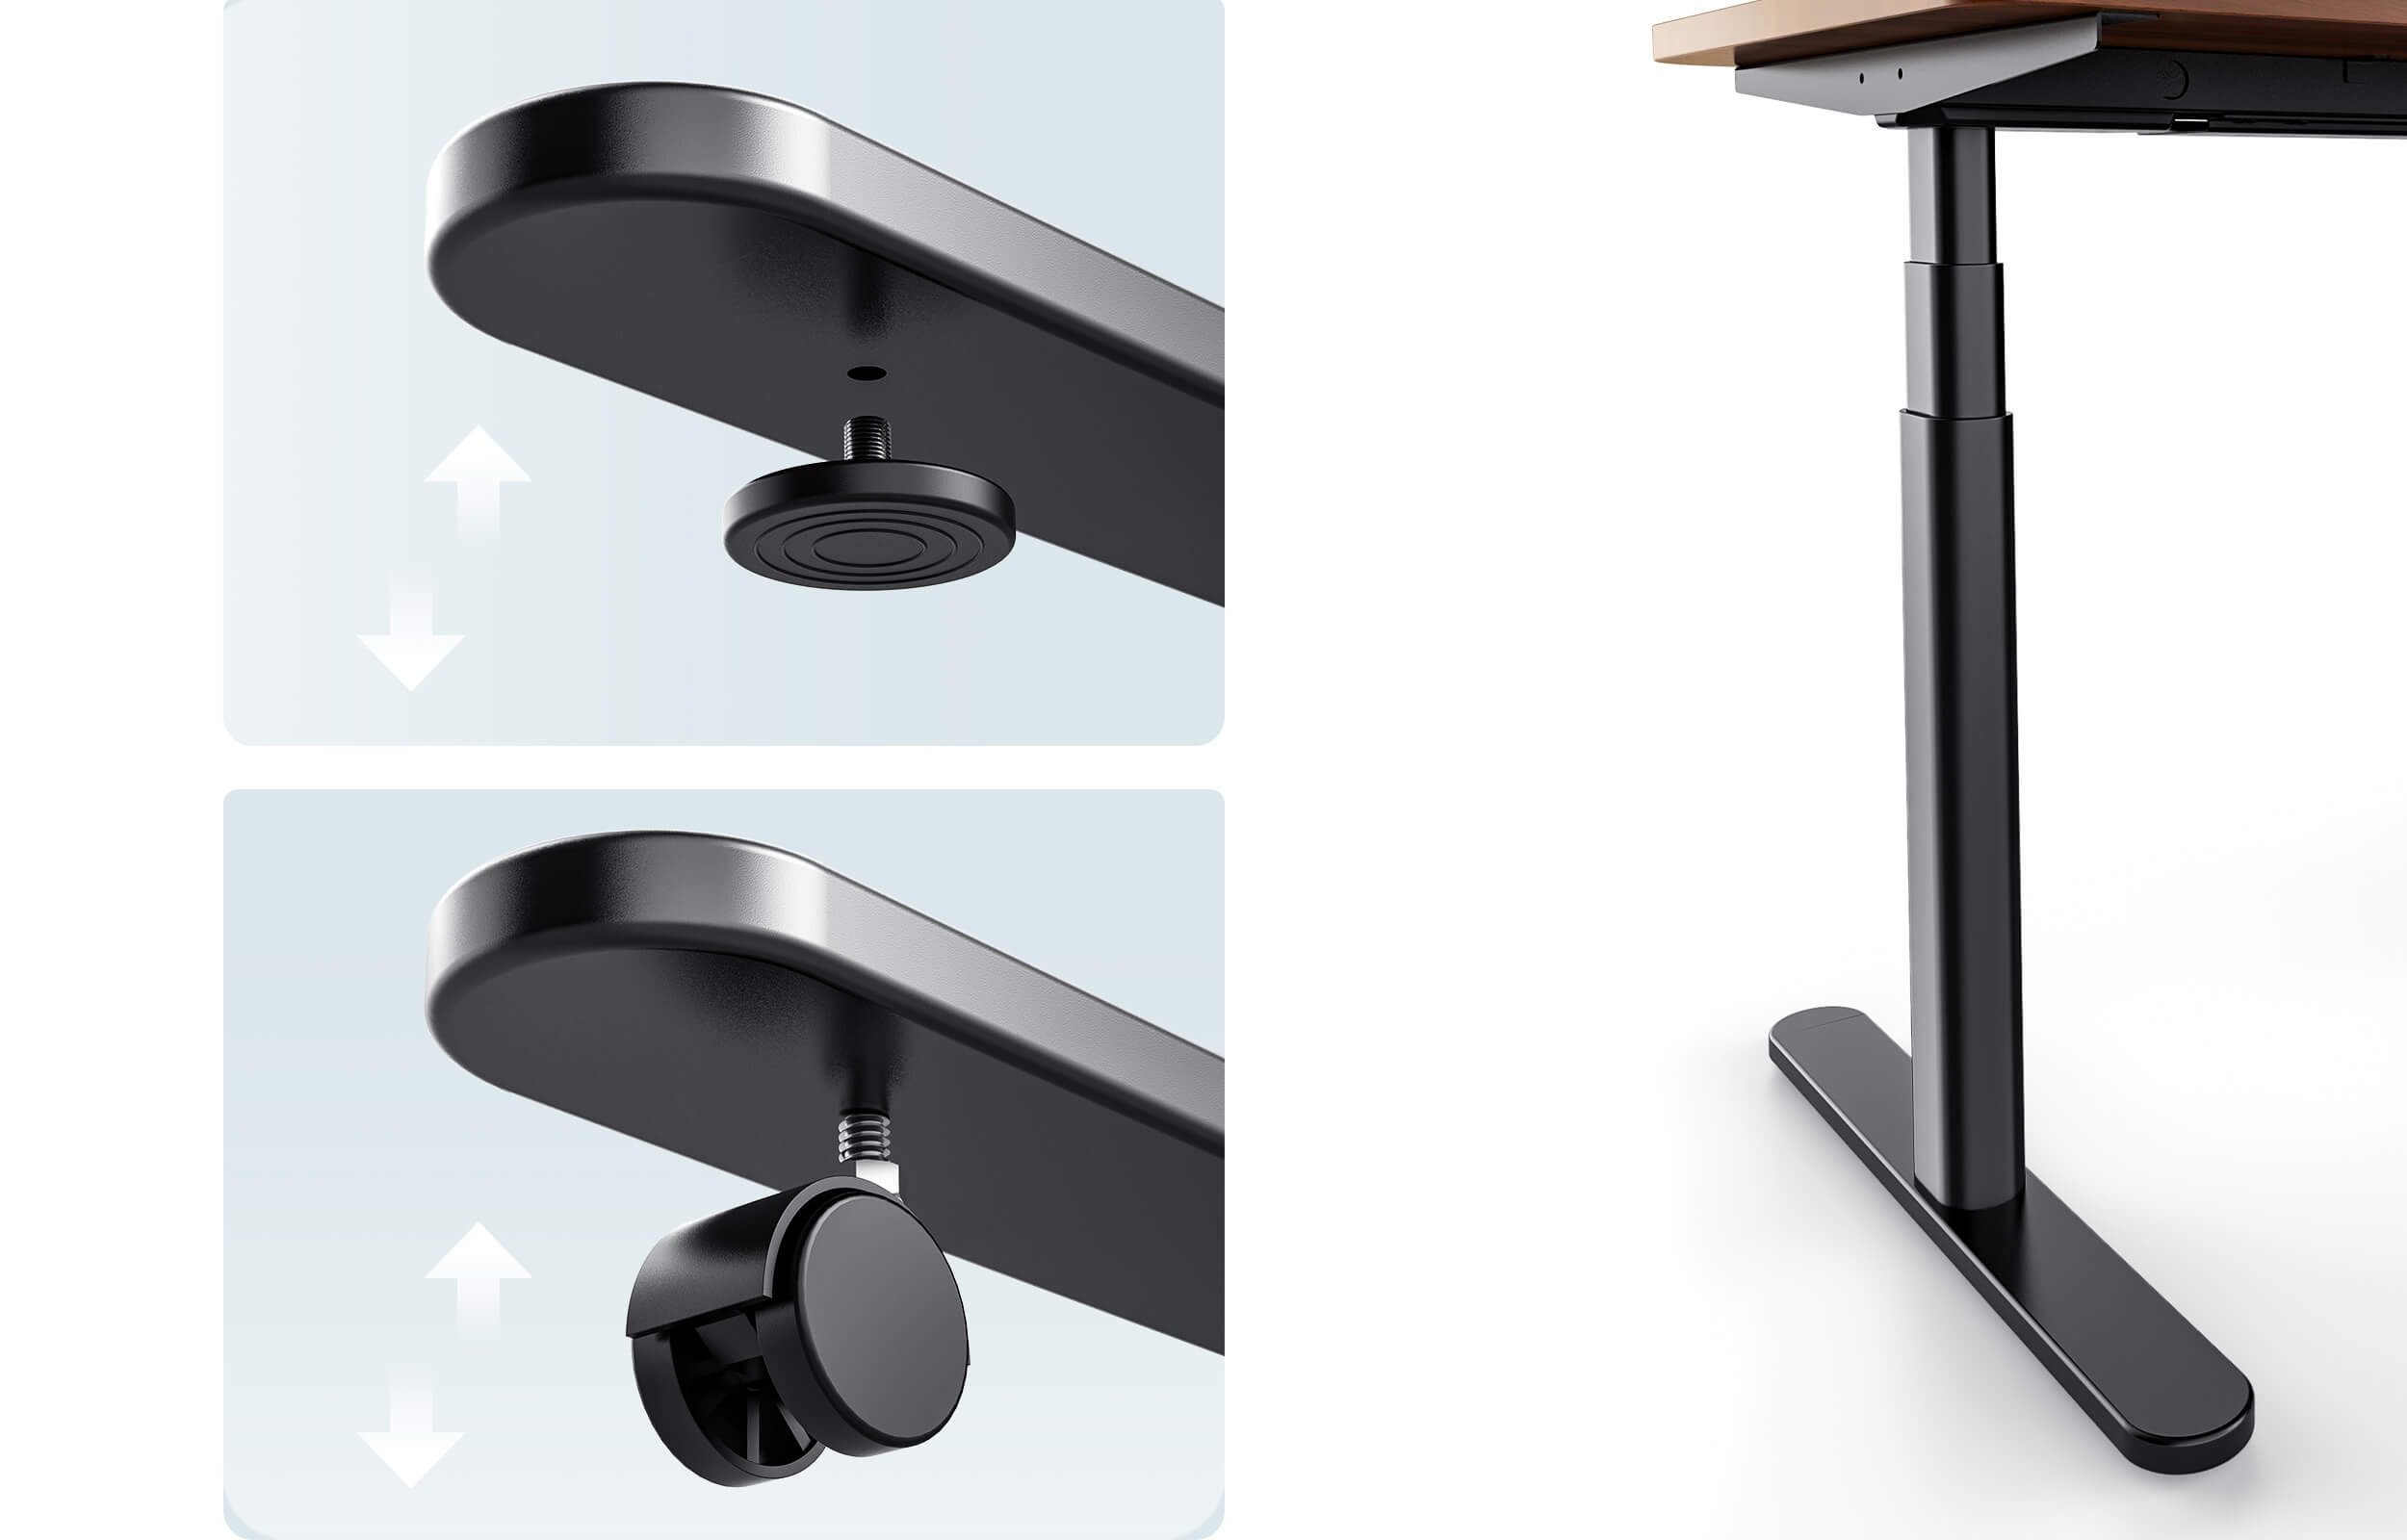 Standing desk sleek oval feet with pad and castors included to movearound